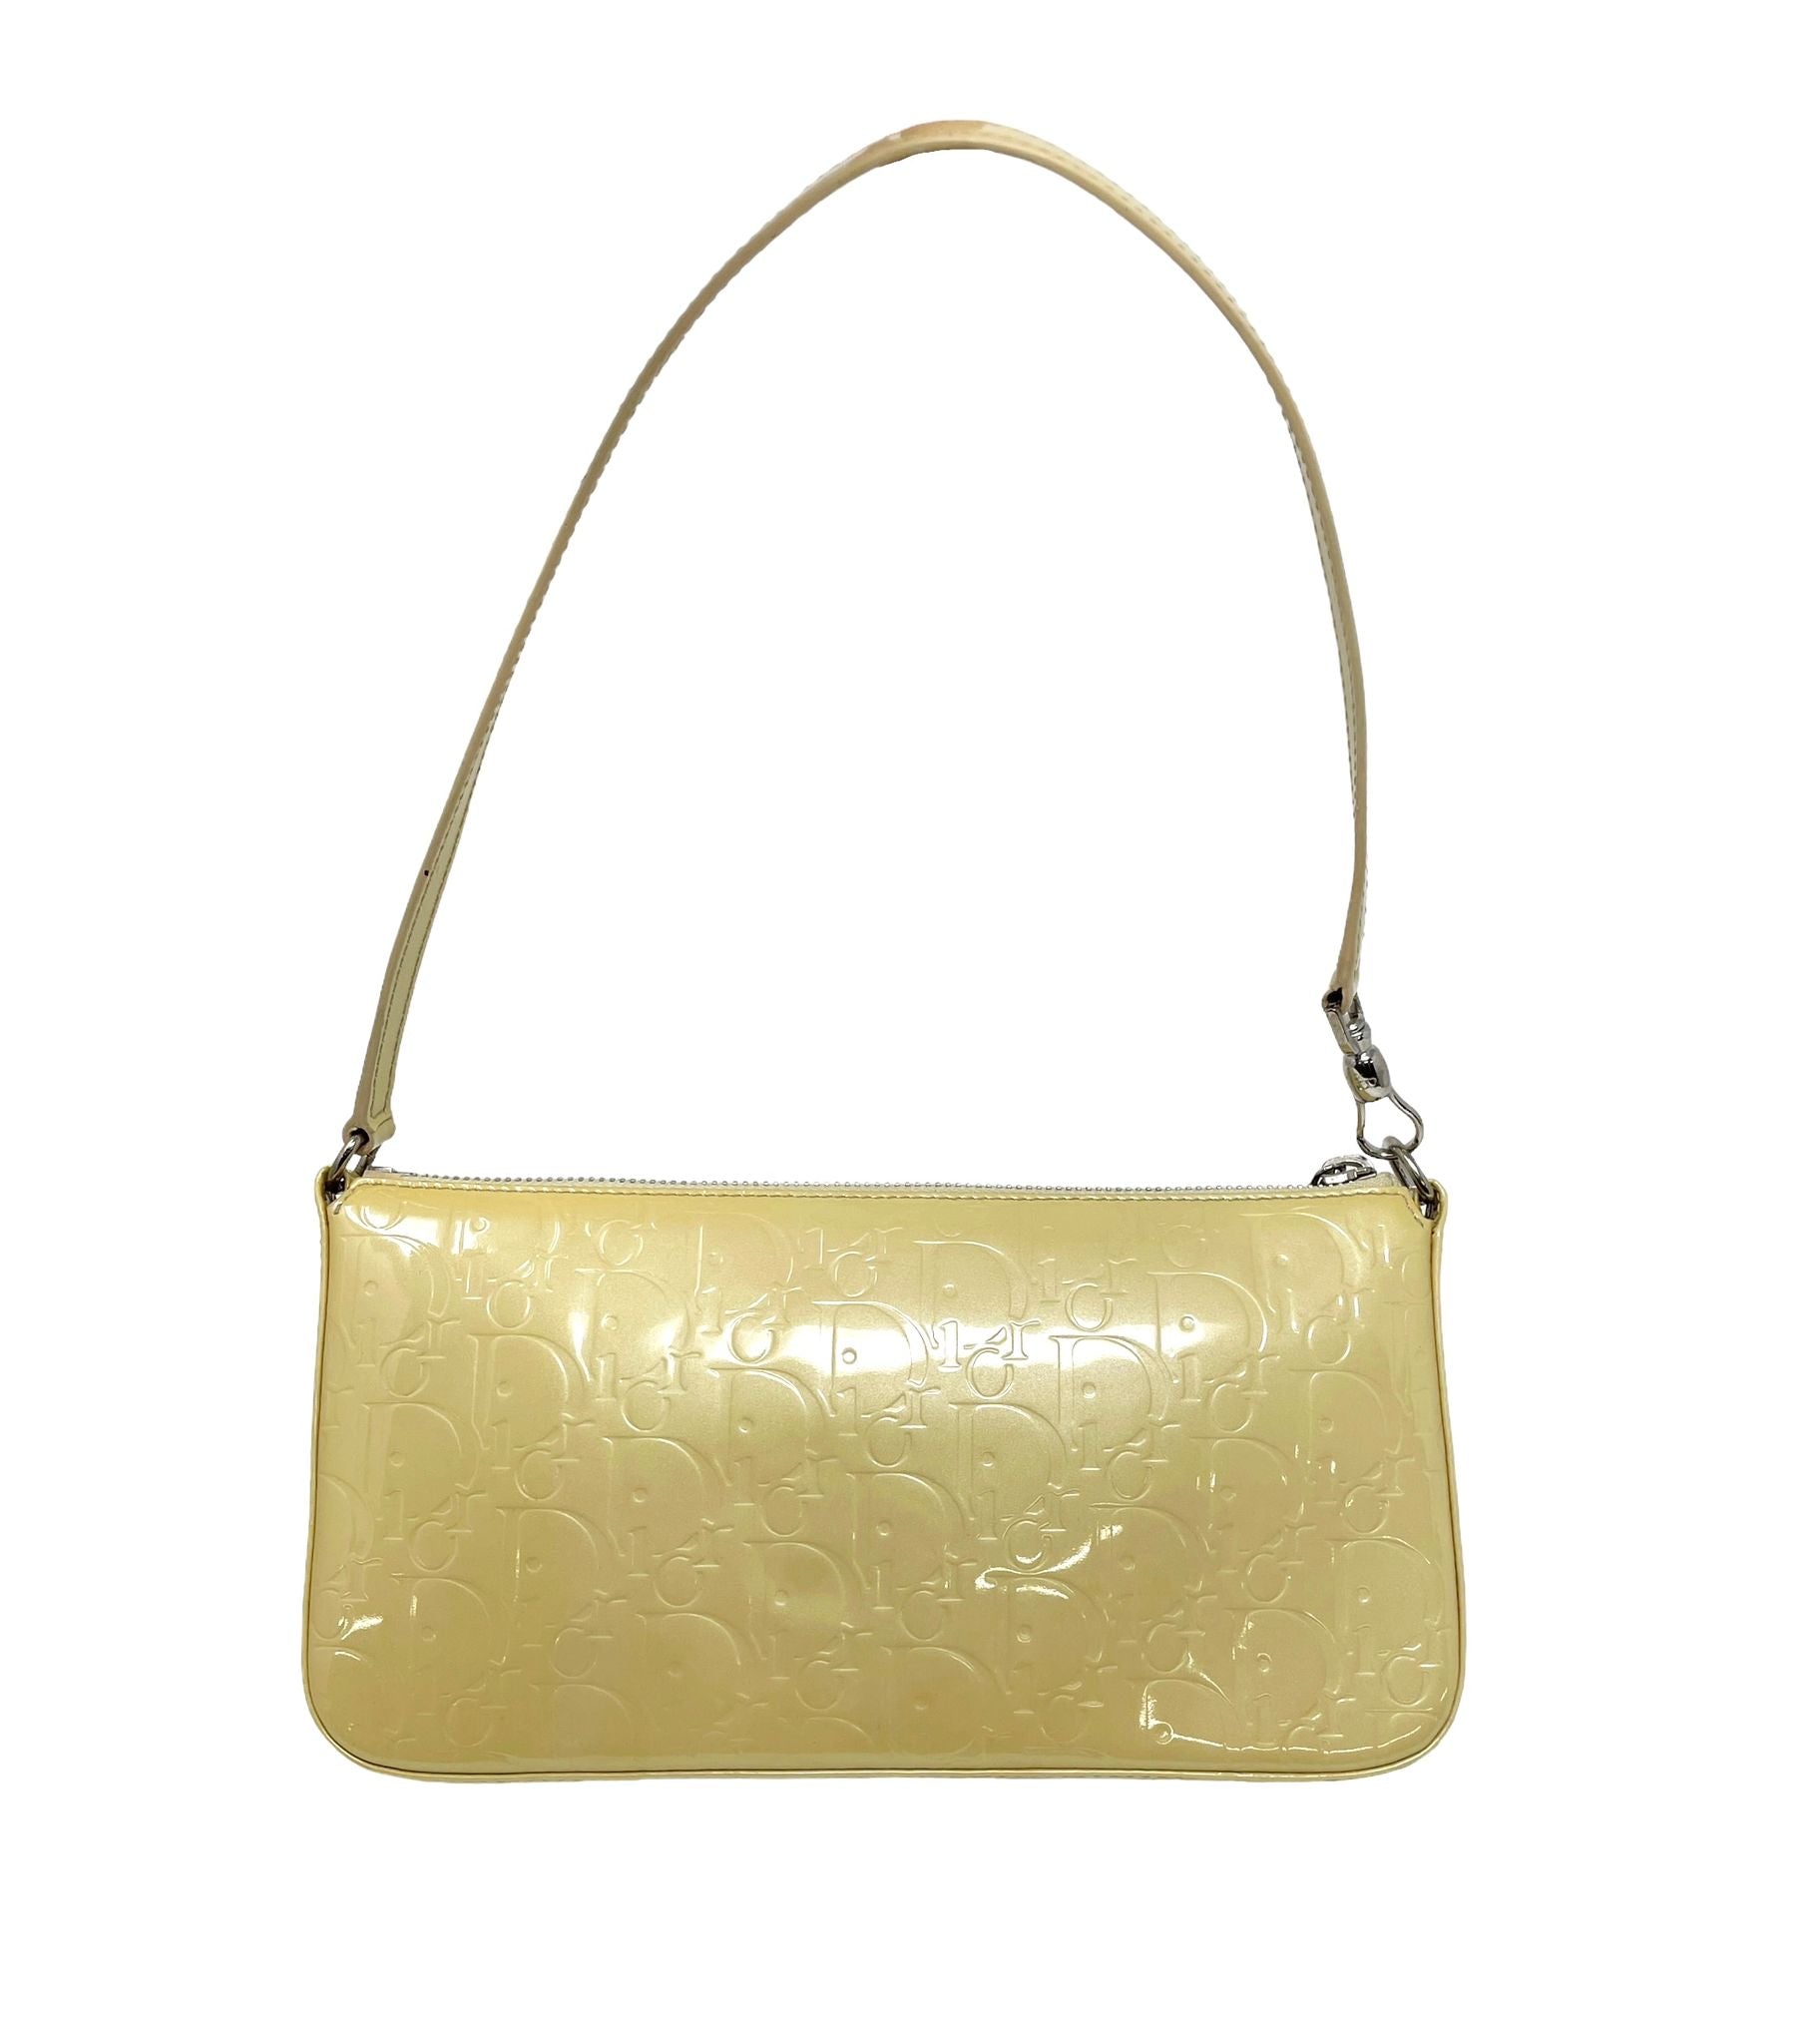 Louis Vuitton - Authenticated Thompson Handbag - Patent Leather Gold for Women, Good Condition